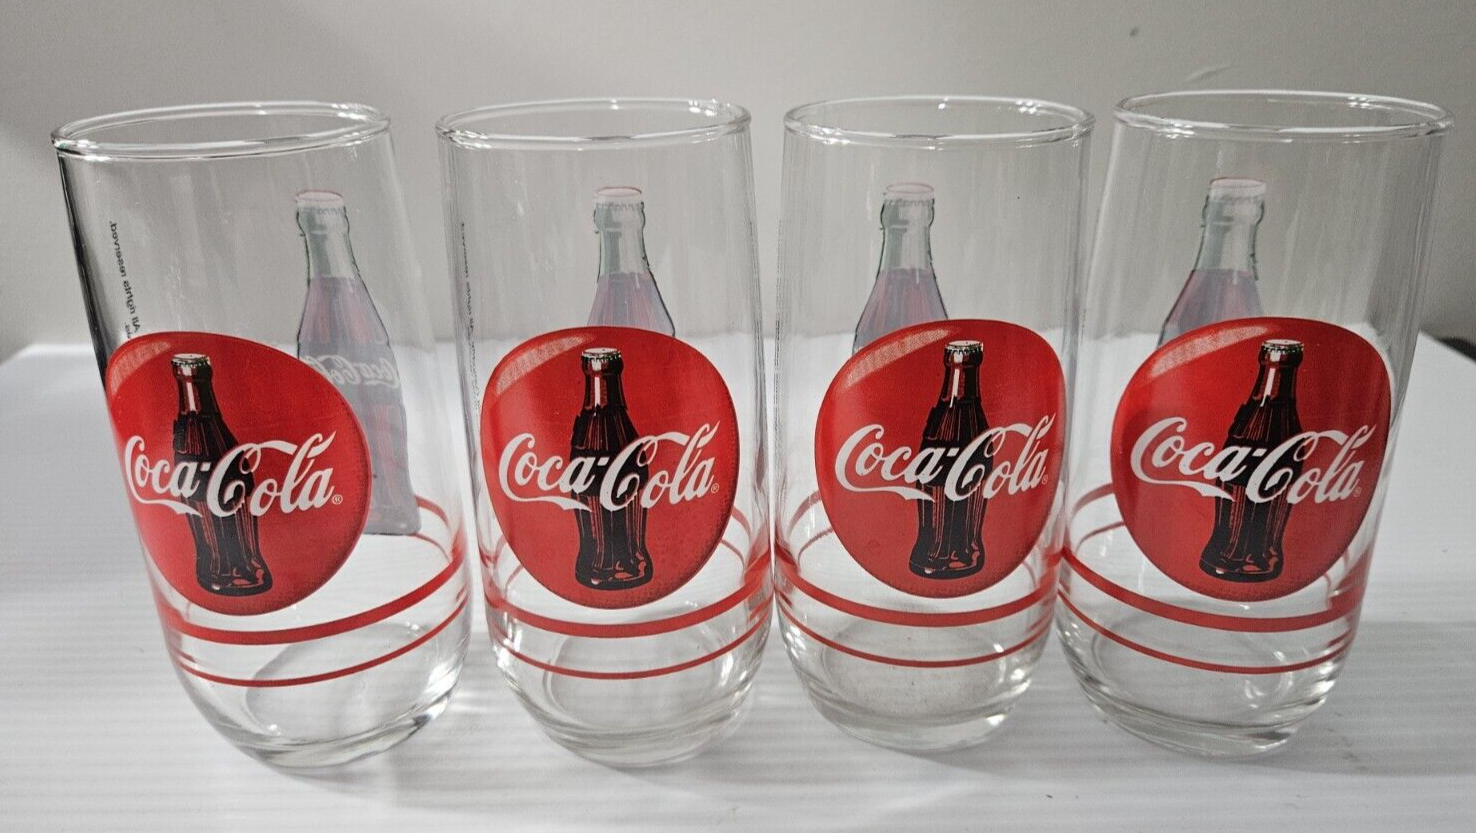 Primary image for Coca-Cola Drinking Glasses (Lot of 4) With Stripes and Coke Bottle logo c1989